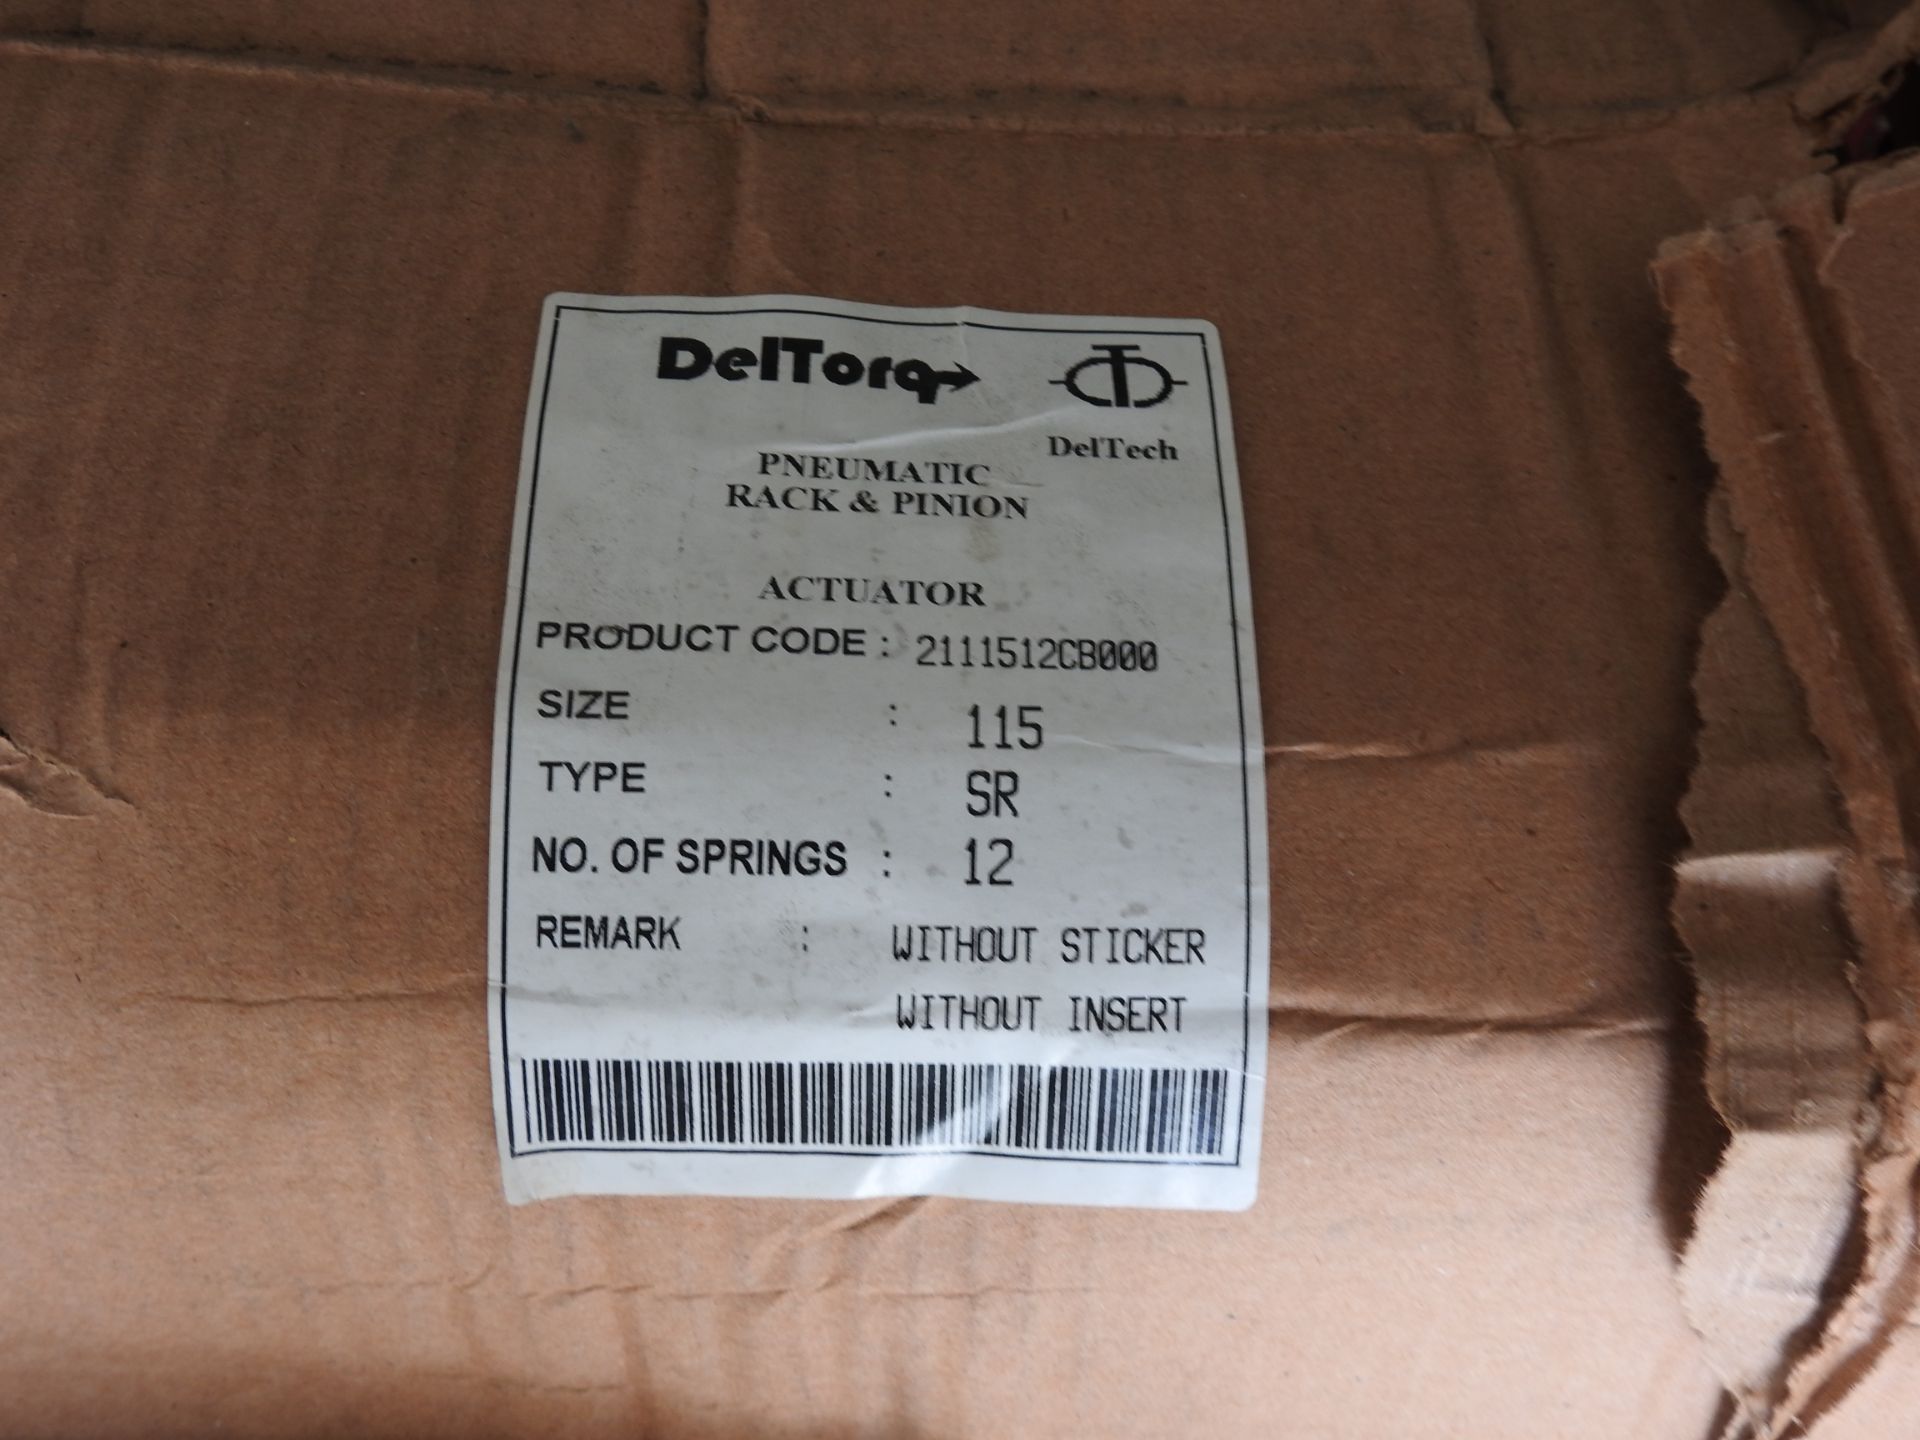 Lot of Pneumatic Valve Actuators, DelTorq, Mdl. 211512CB000 ** Located: 4402 Theiss Rd, Houston, - Image 5 of 10